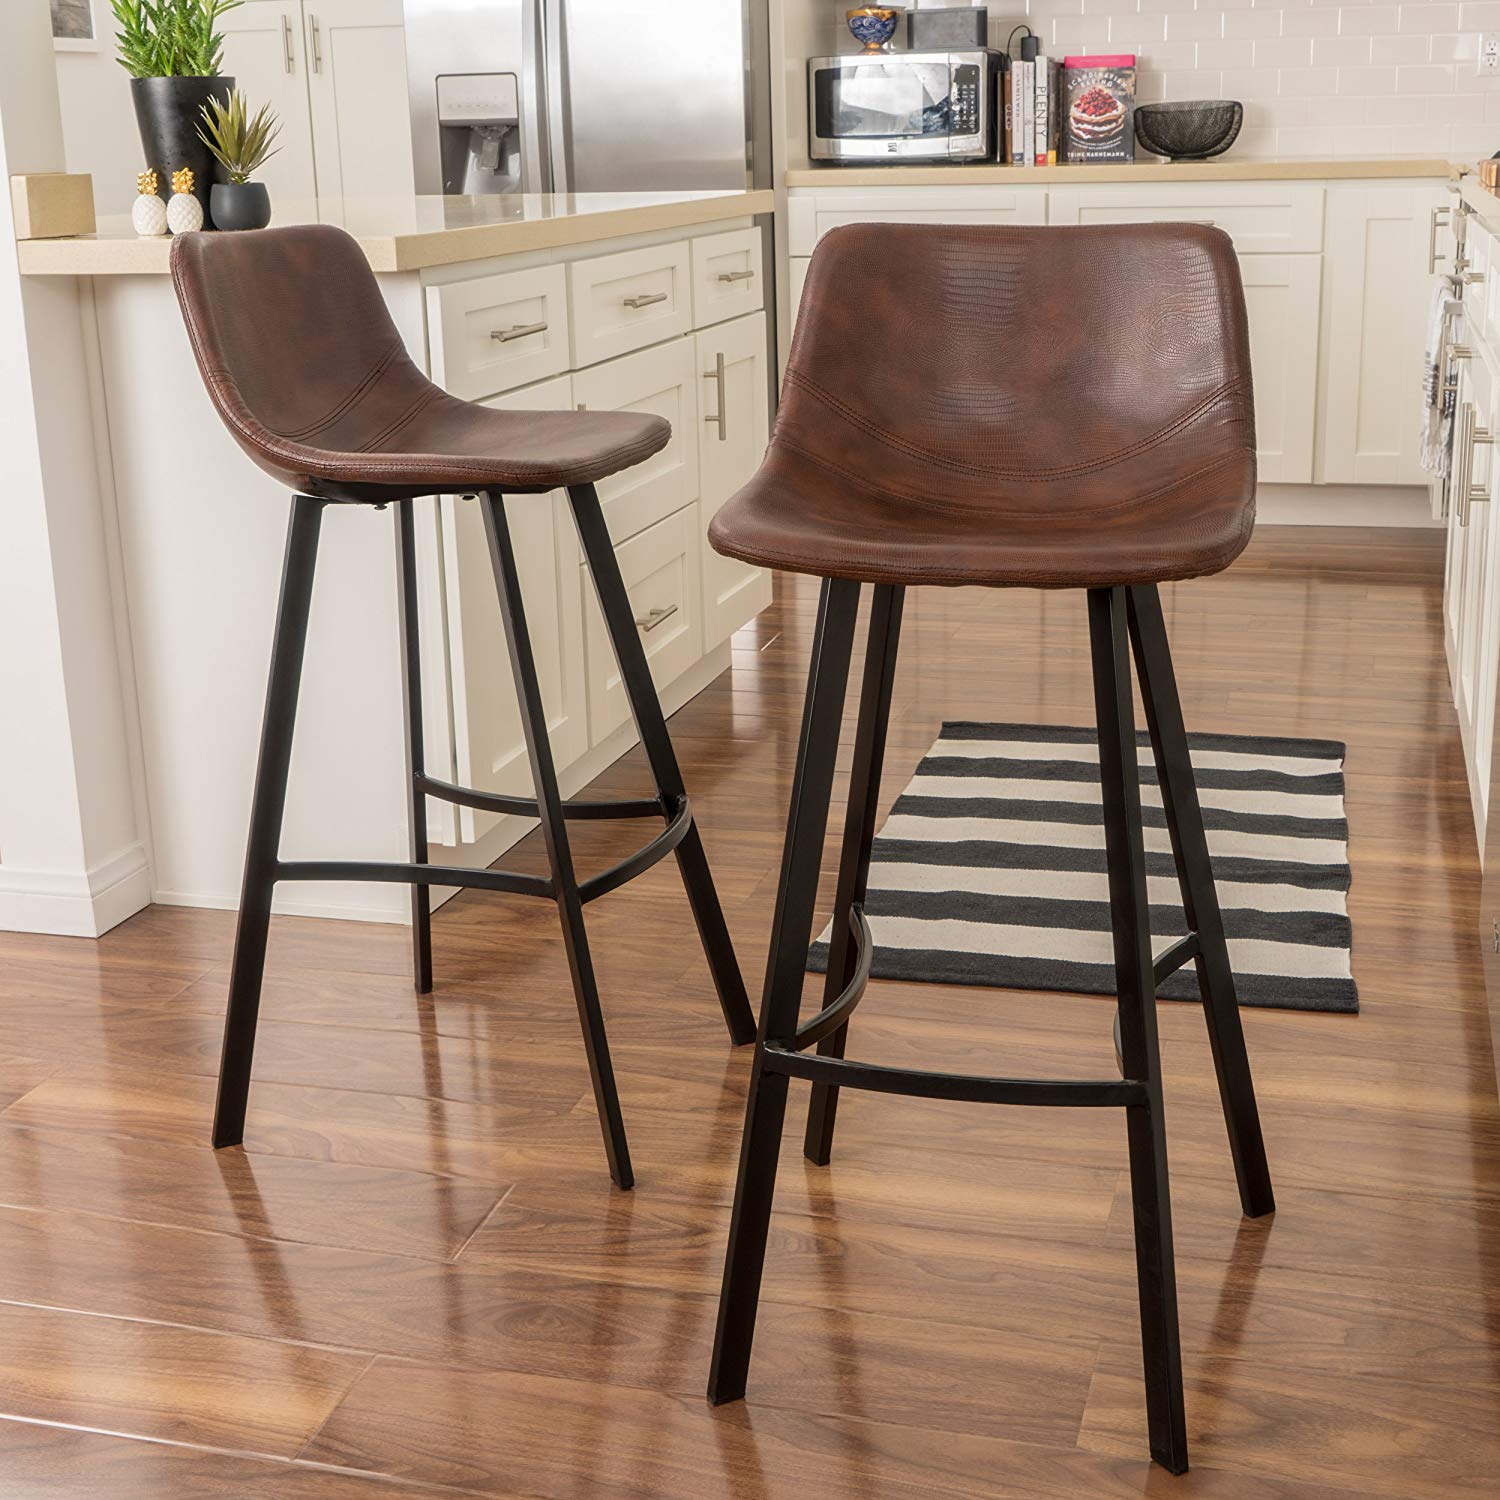 The Top 10 Best Bar Stools Of 2021, Best Counter Stools With Backs